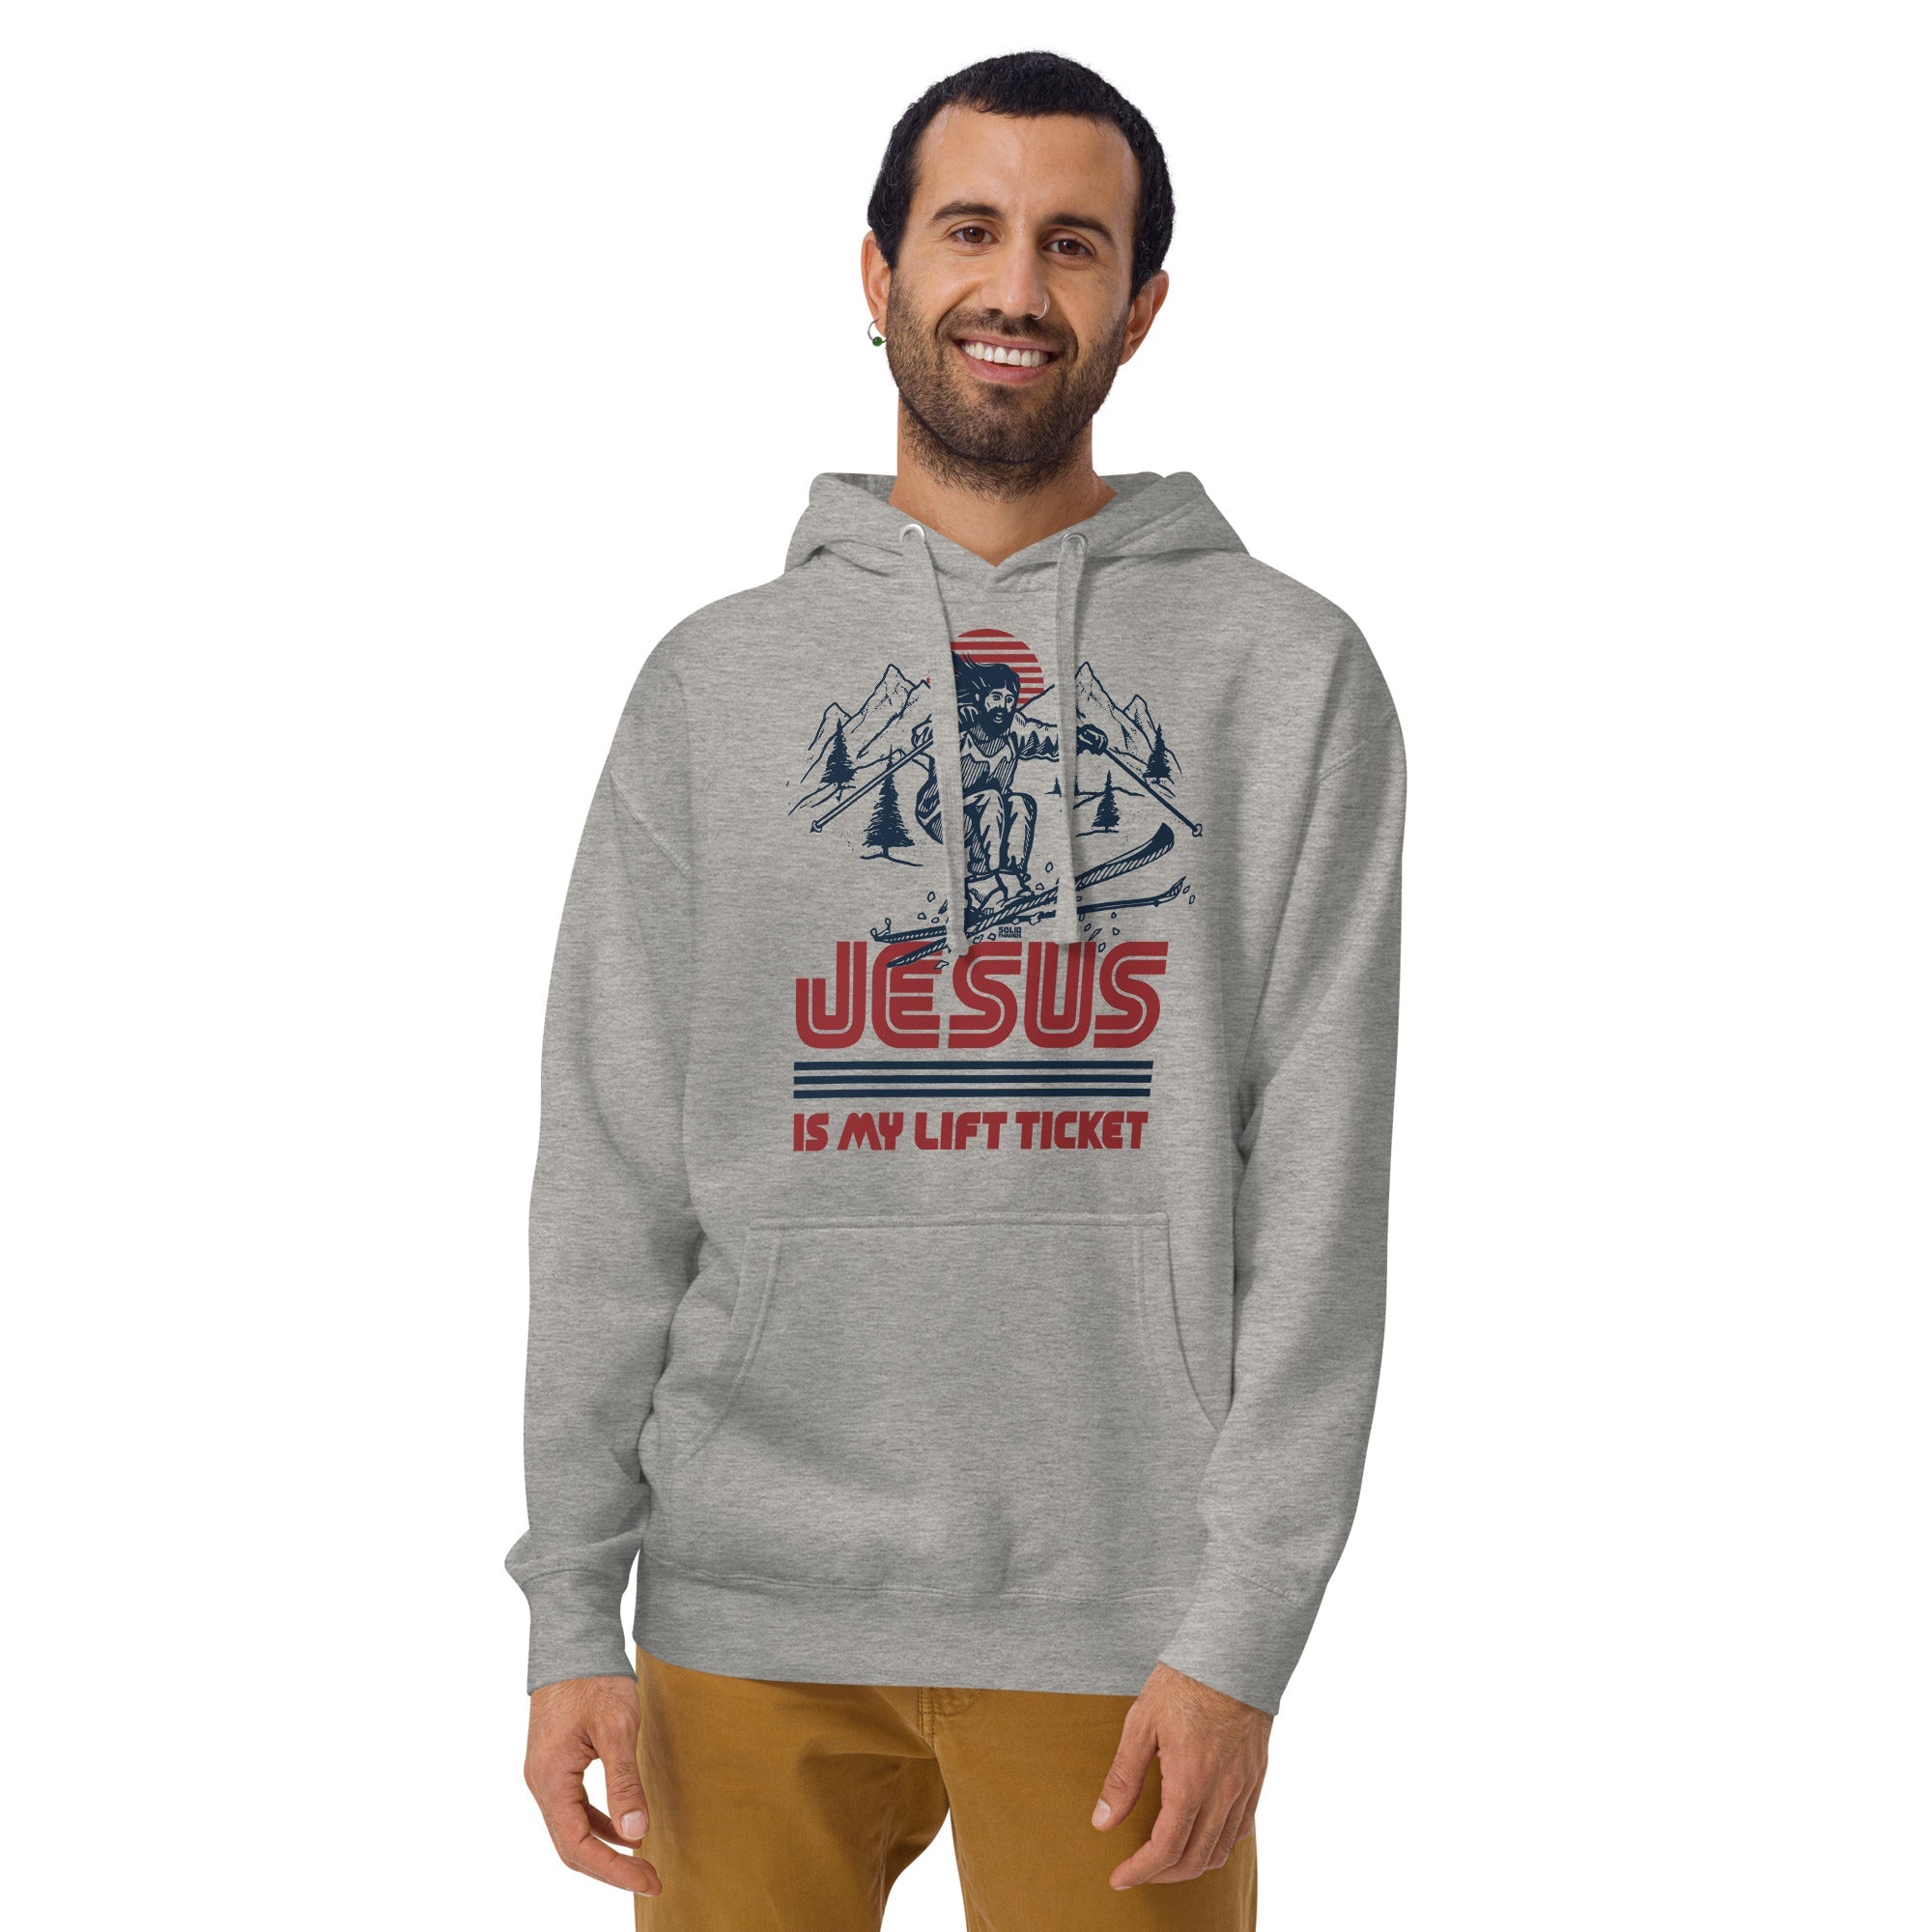 Jesus Is My Lift Ticket Funny Classic Pullover Hoodie | Cool Skiing Fleece On Model | Solid Threads